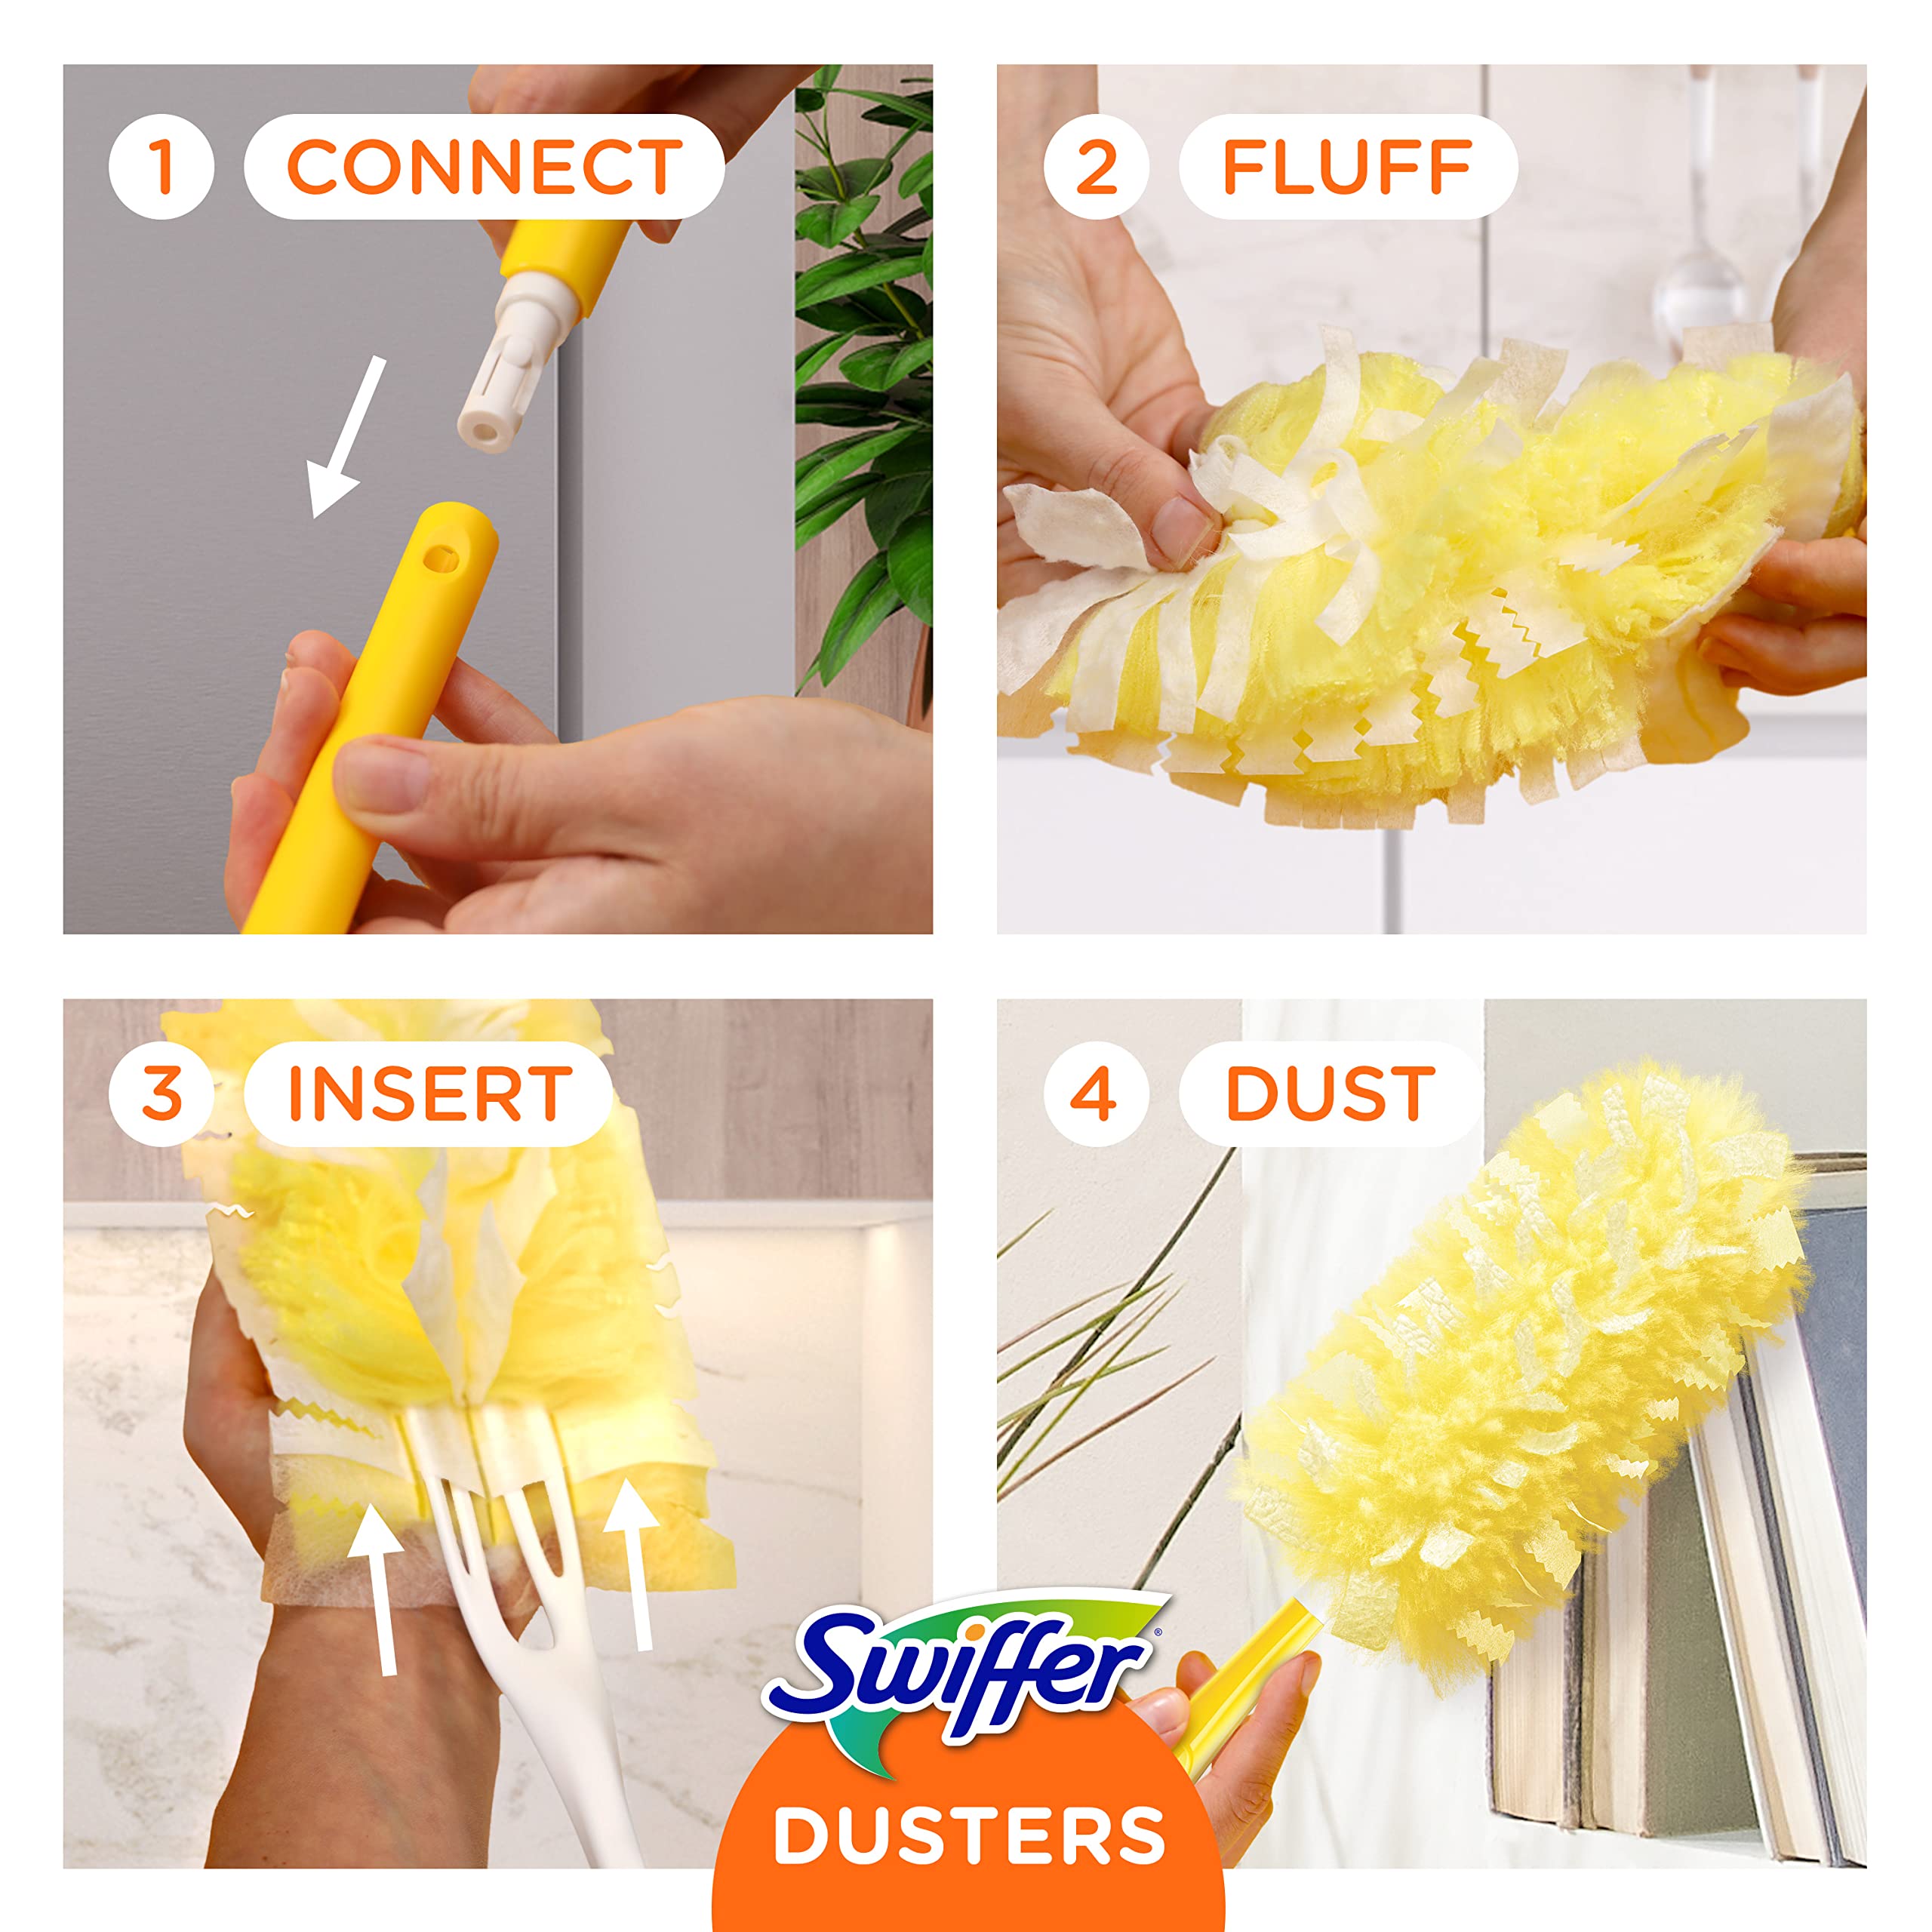 Swiffer Dusters Multi-Surface Heavy Duty Duster Lavender Refills, 11 Count